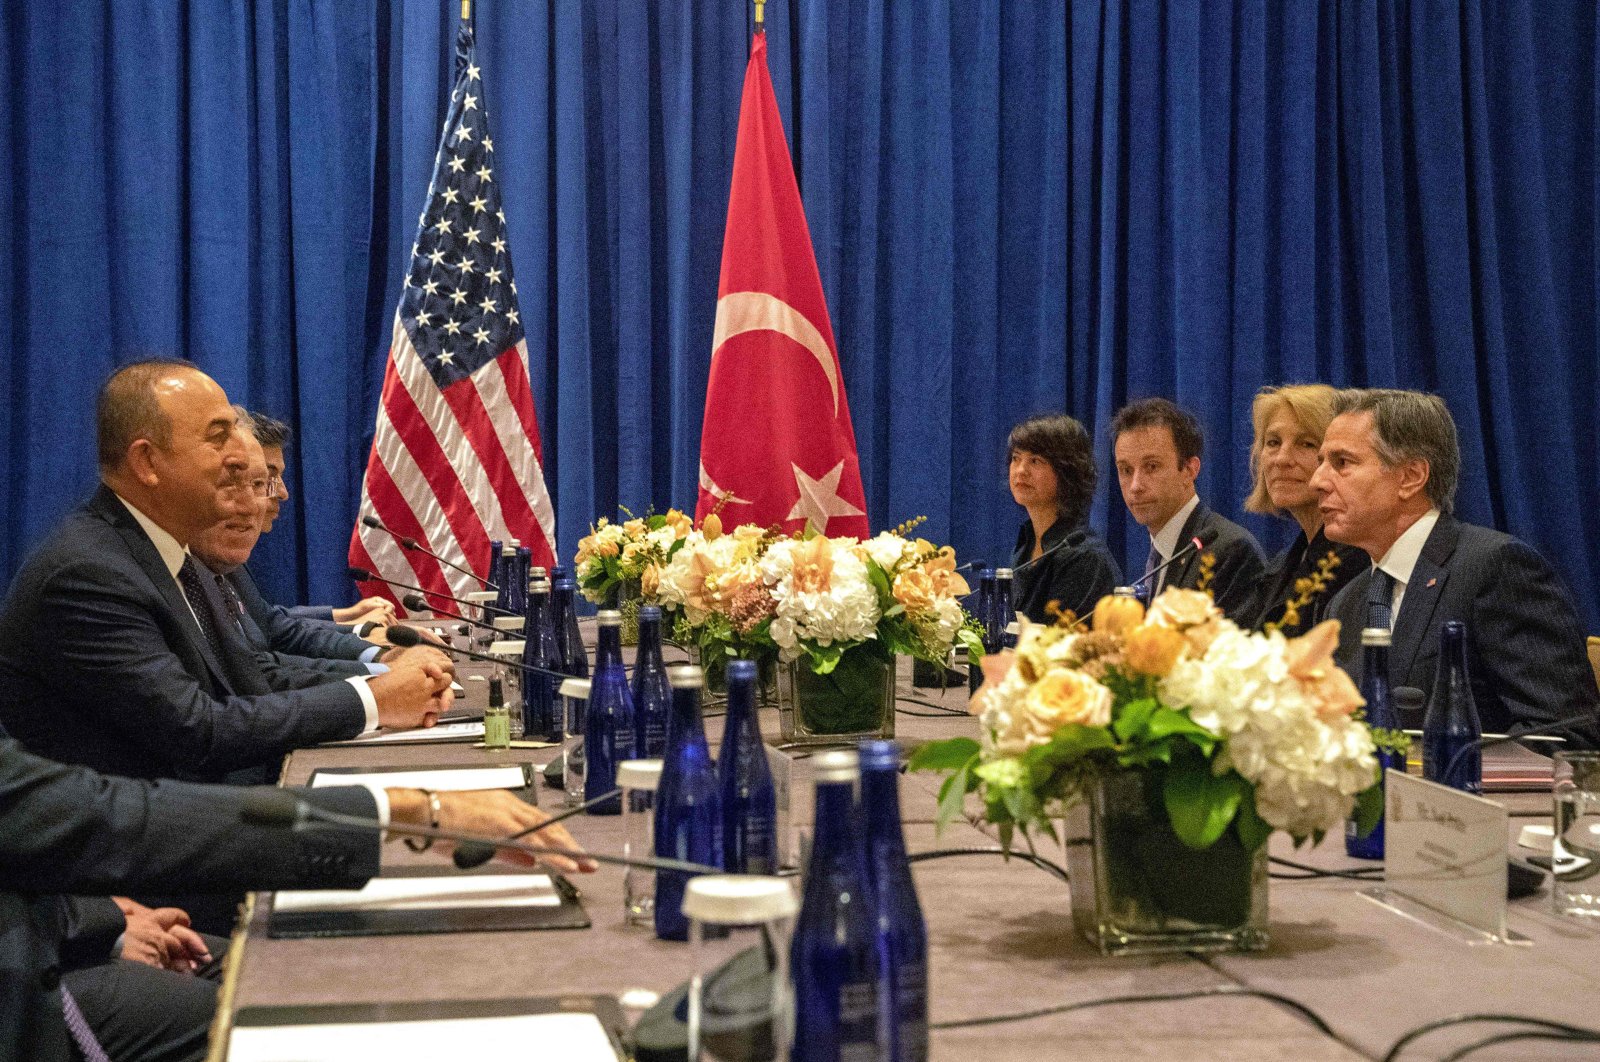 Foreign Minister Mevlüt Çavuşoğlu meets with U.S. Secretary of State Antony Blinken (R) on the sidelines of the 77th United Nations General Assembly in New York City, U.S., Sept. 20, 2022. (AFP Photo)